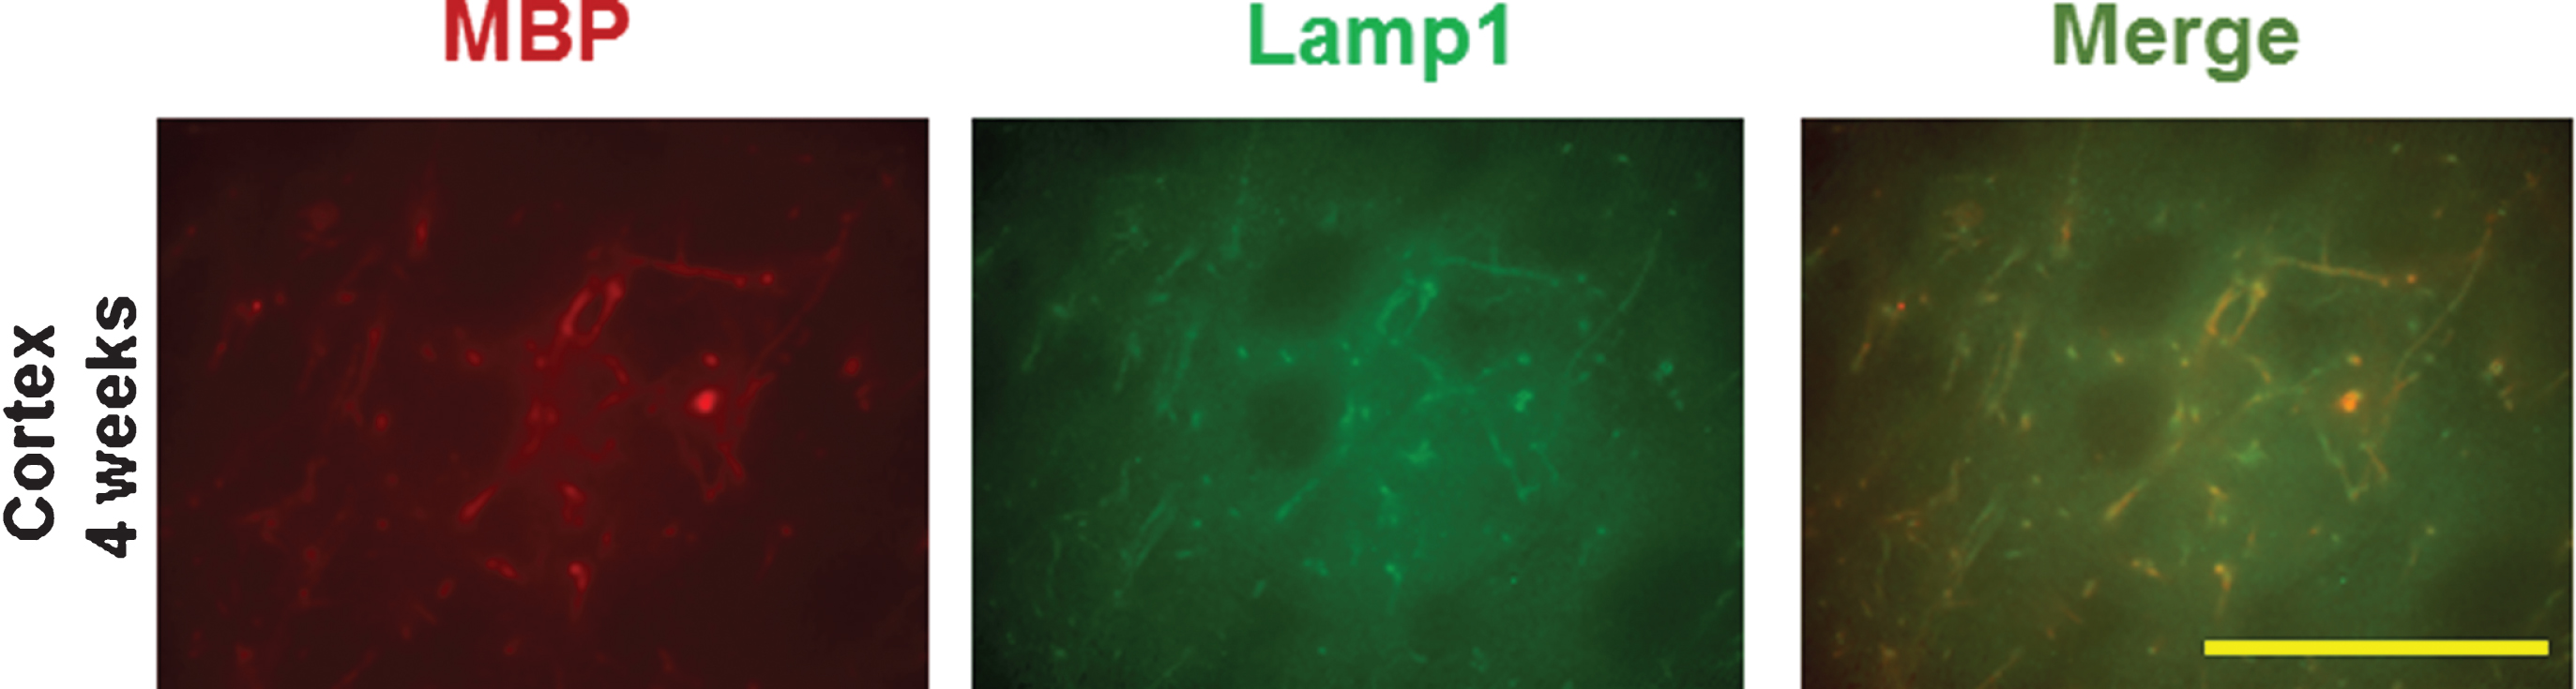 Double staining of myelin basic protein (MBP) with lysosomal-associated membrane protein 1 (Lamp1) in the cortex following LPS/IS/H. At 4 weeks post LPS/IS/H, focal areas of Lamp1 immunostaining and MBP immunostaining were co-localized (Merge). Bar = 50 μm.